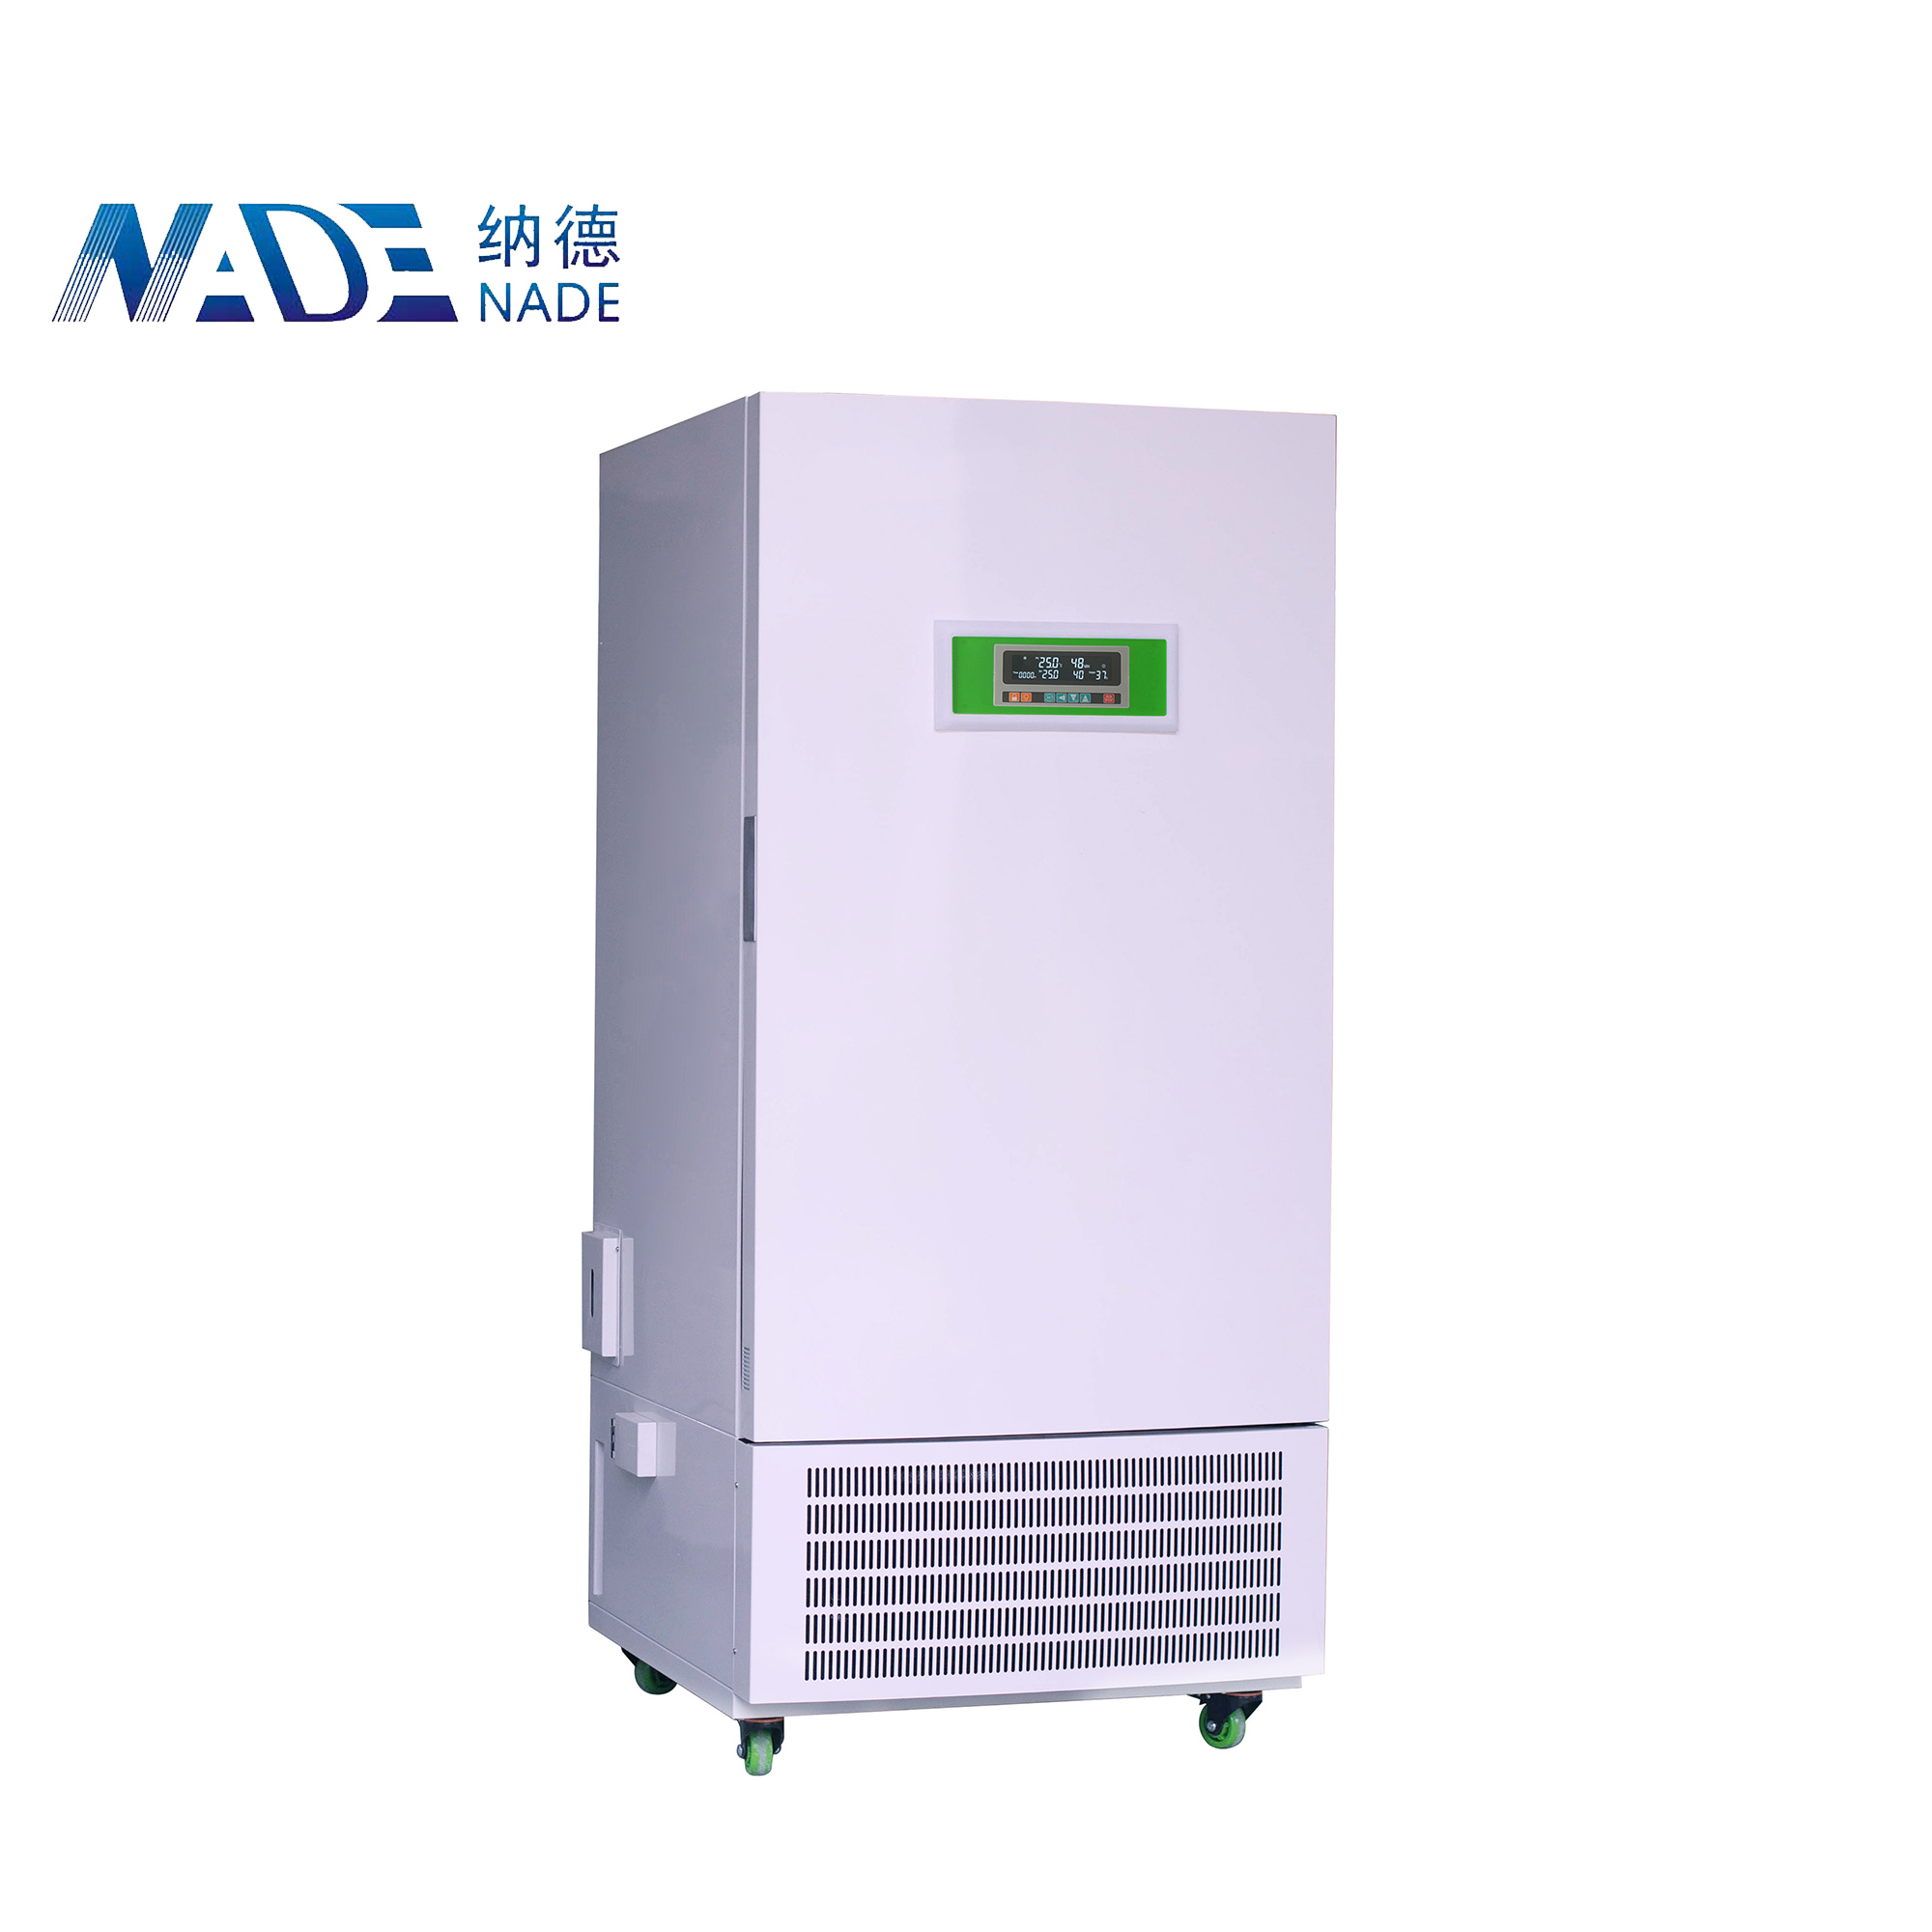 Nade laboratory LCD display Temperature & Illumination Medicine Stability Testing Chamber LDS-175HY-N 175L